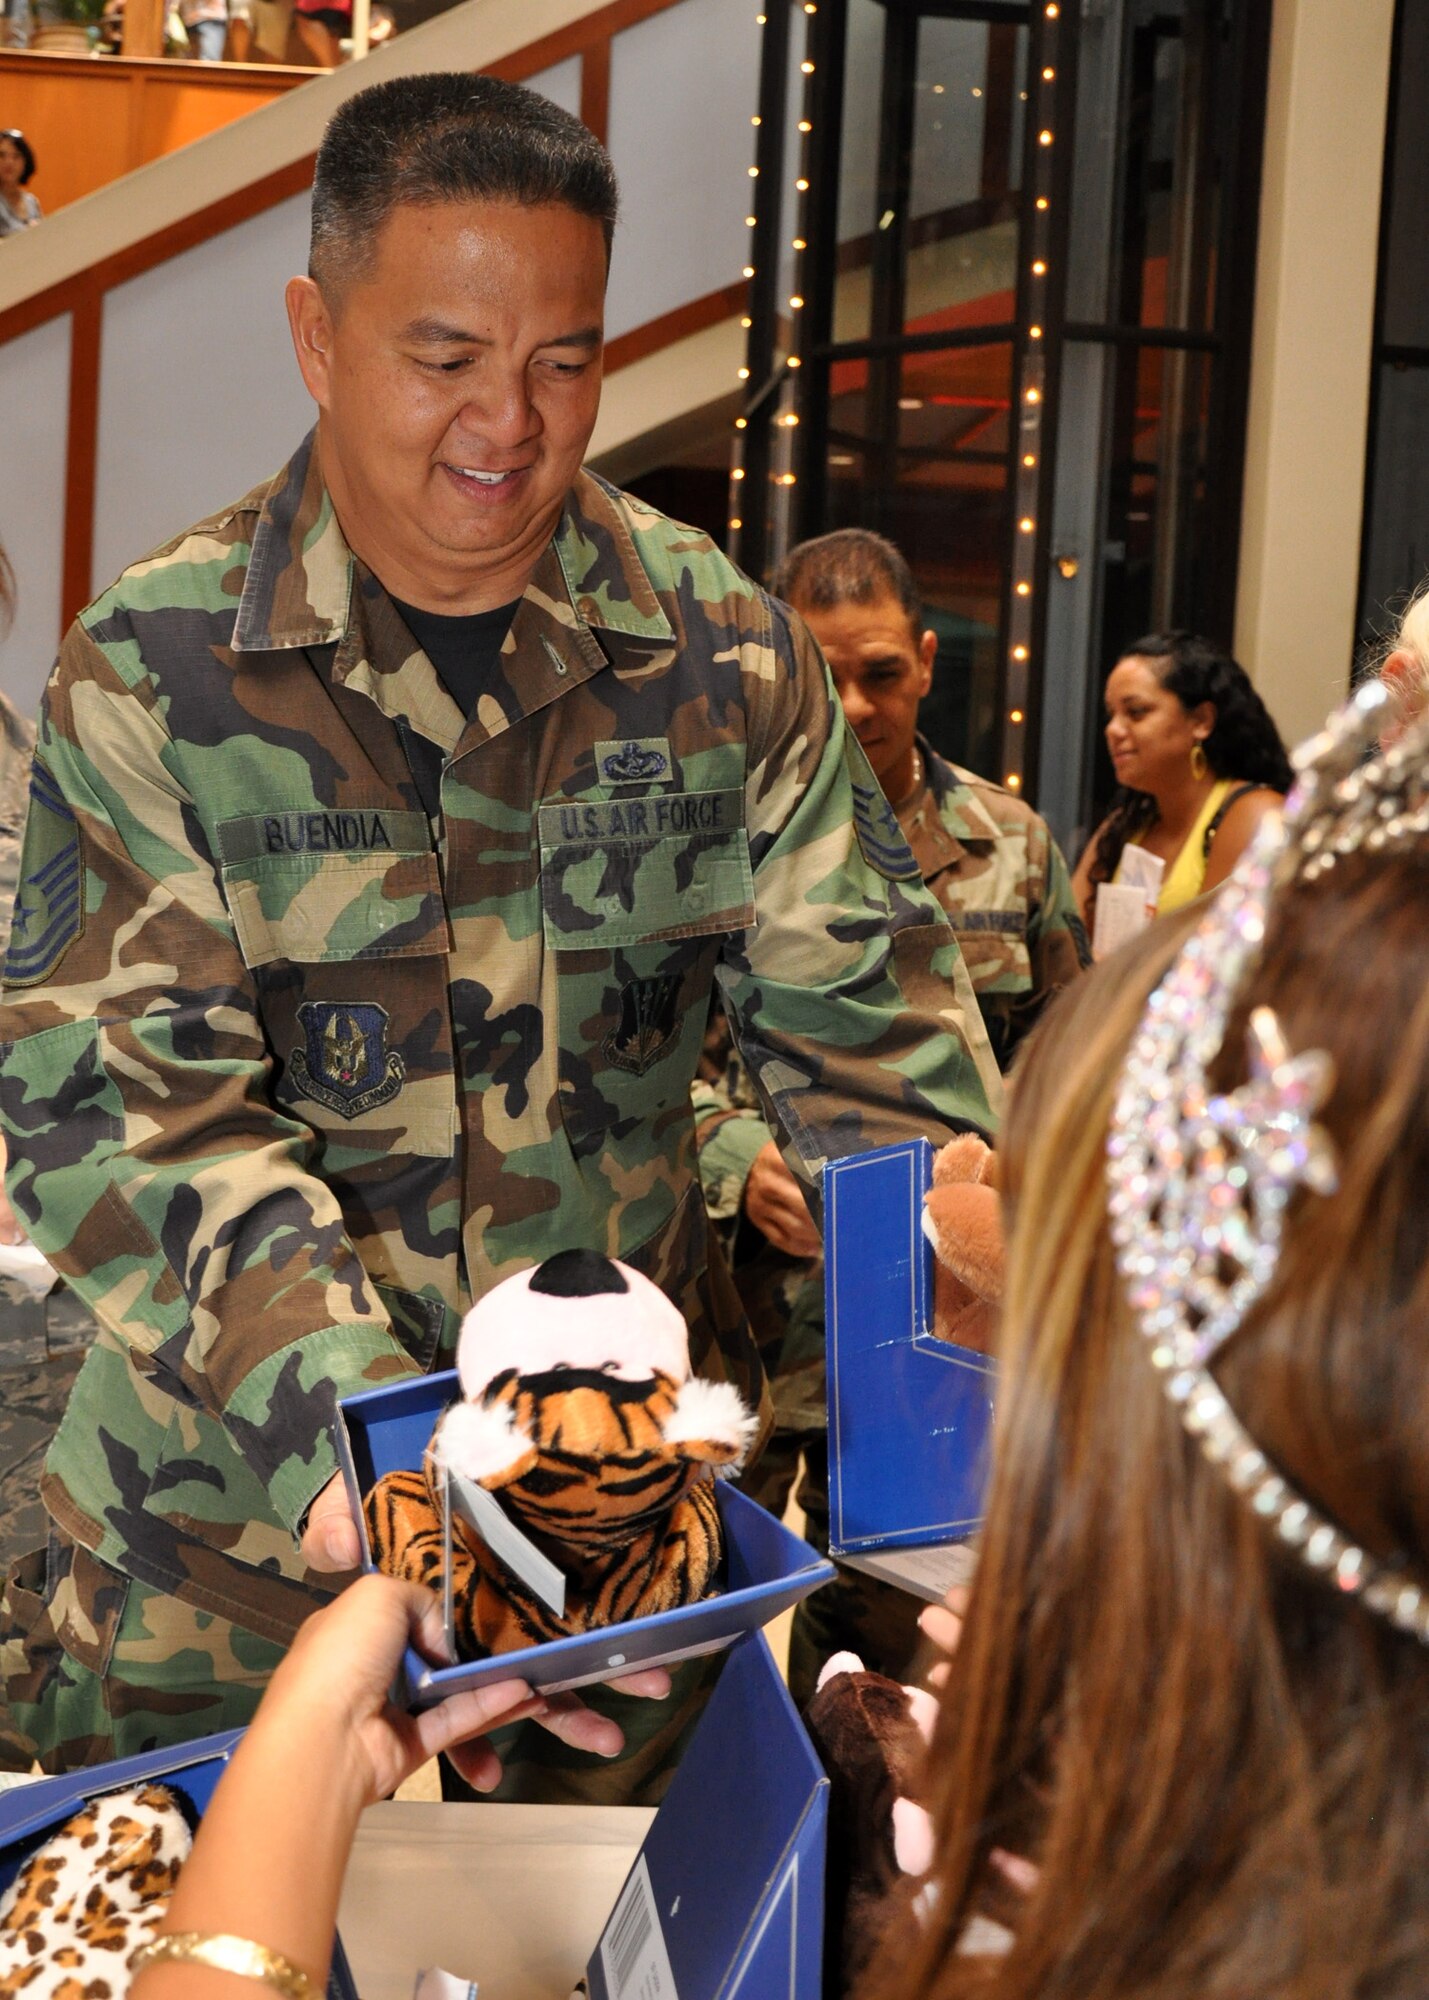 Senior Master Sgt. John Buendia, 624th Civil Engineer Squadron, hands in stuffed animals donated by the 624th Regional Support Group for the 12th Annual Teddy Bear Round-up and Family Resource Fair April 4 at Pearlridge Shopping Center, Aiea, Hawaii. The drive was in support of April Child Abuse Prevention Month. The 42 bears brought by the Air Force Reservists were added to a growing pile in the center of the mall that are destined to go to local children and families who are in crisis and in need of special attention. (Air Force photo/Master Sgt. Daniel Nathaniel) 